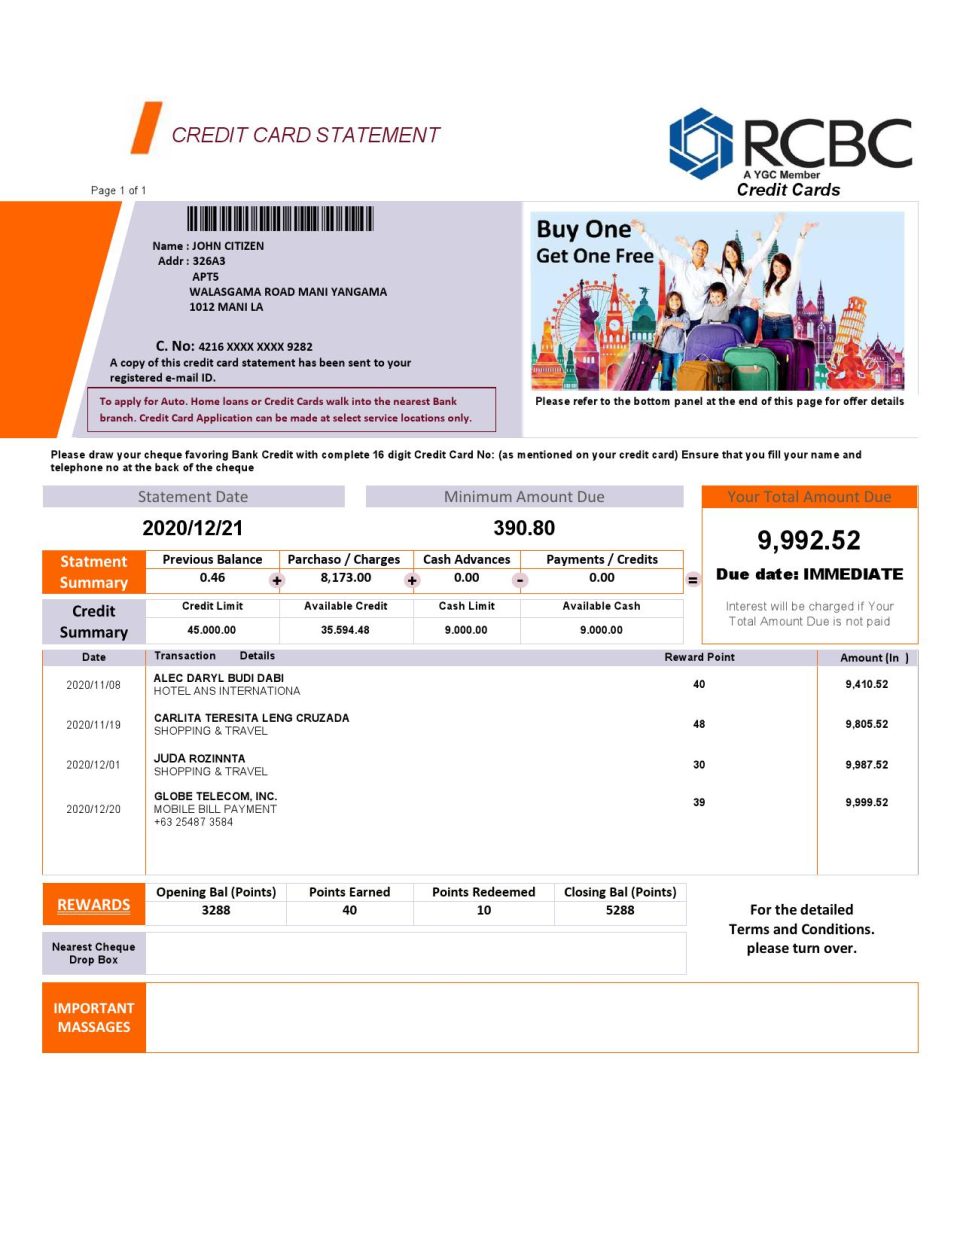 Philippines Rizal Commercial Banking Corporation (RCBC) credit card statement template in Word and PDF format